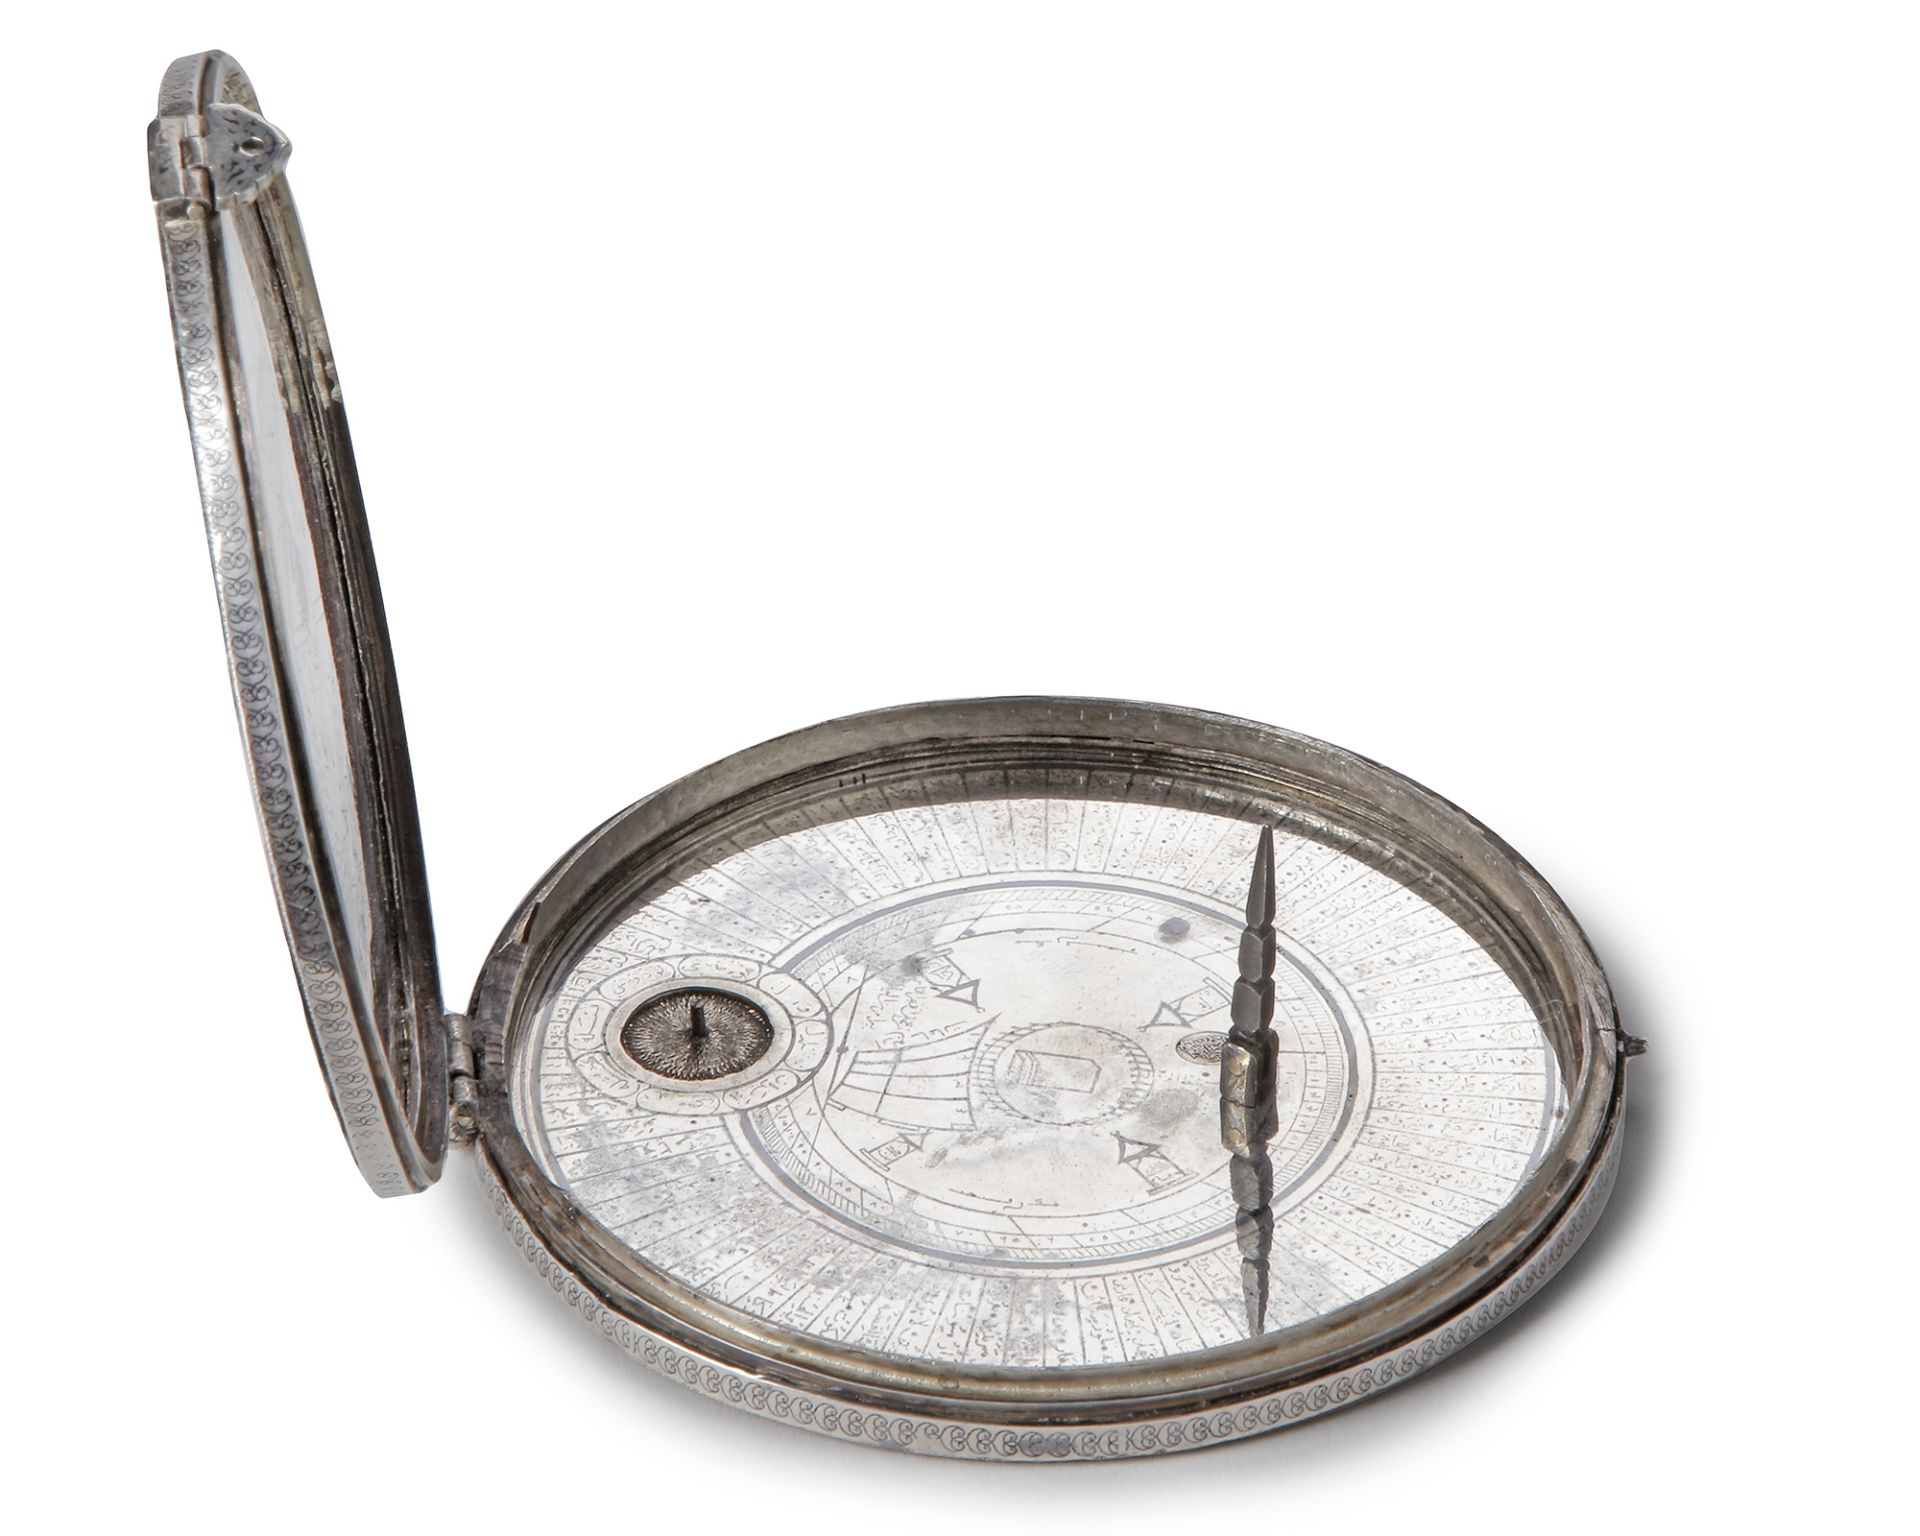 A SILVER PORTABLE FOLDABLE OTTOMAN QIBLA FINDER WITH COMPASS AND DOUBLE SUNDIAL, 19TH CENTURY - Image 4 of 7